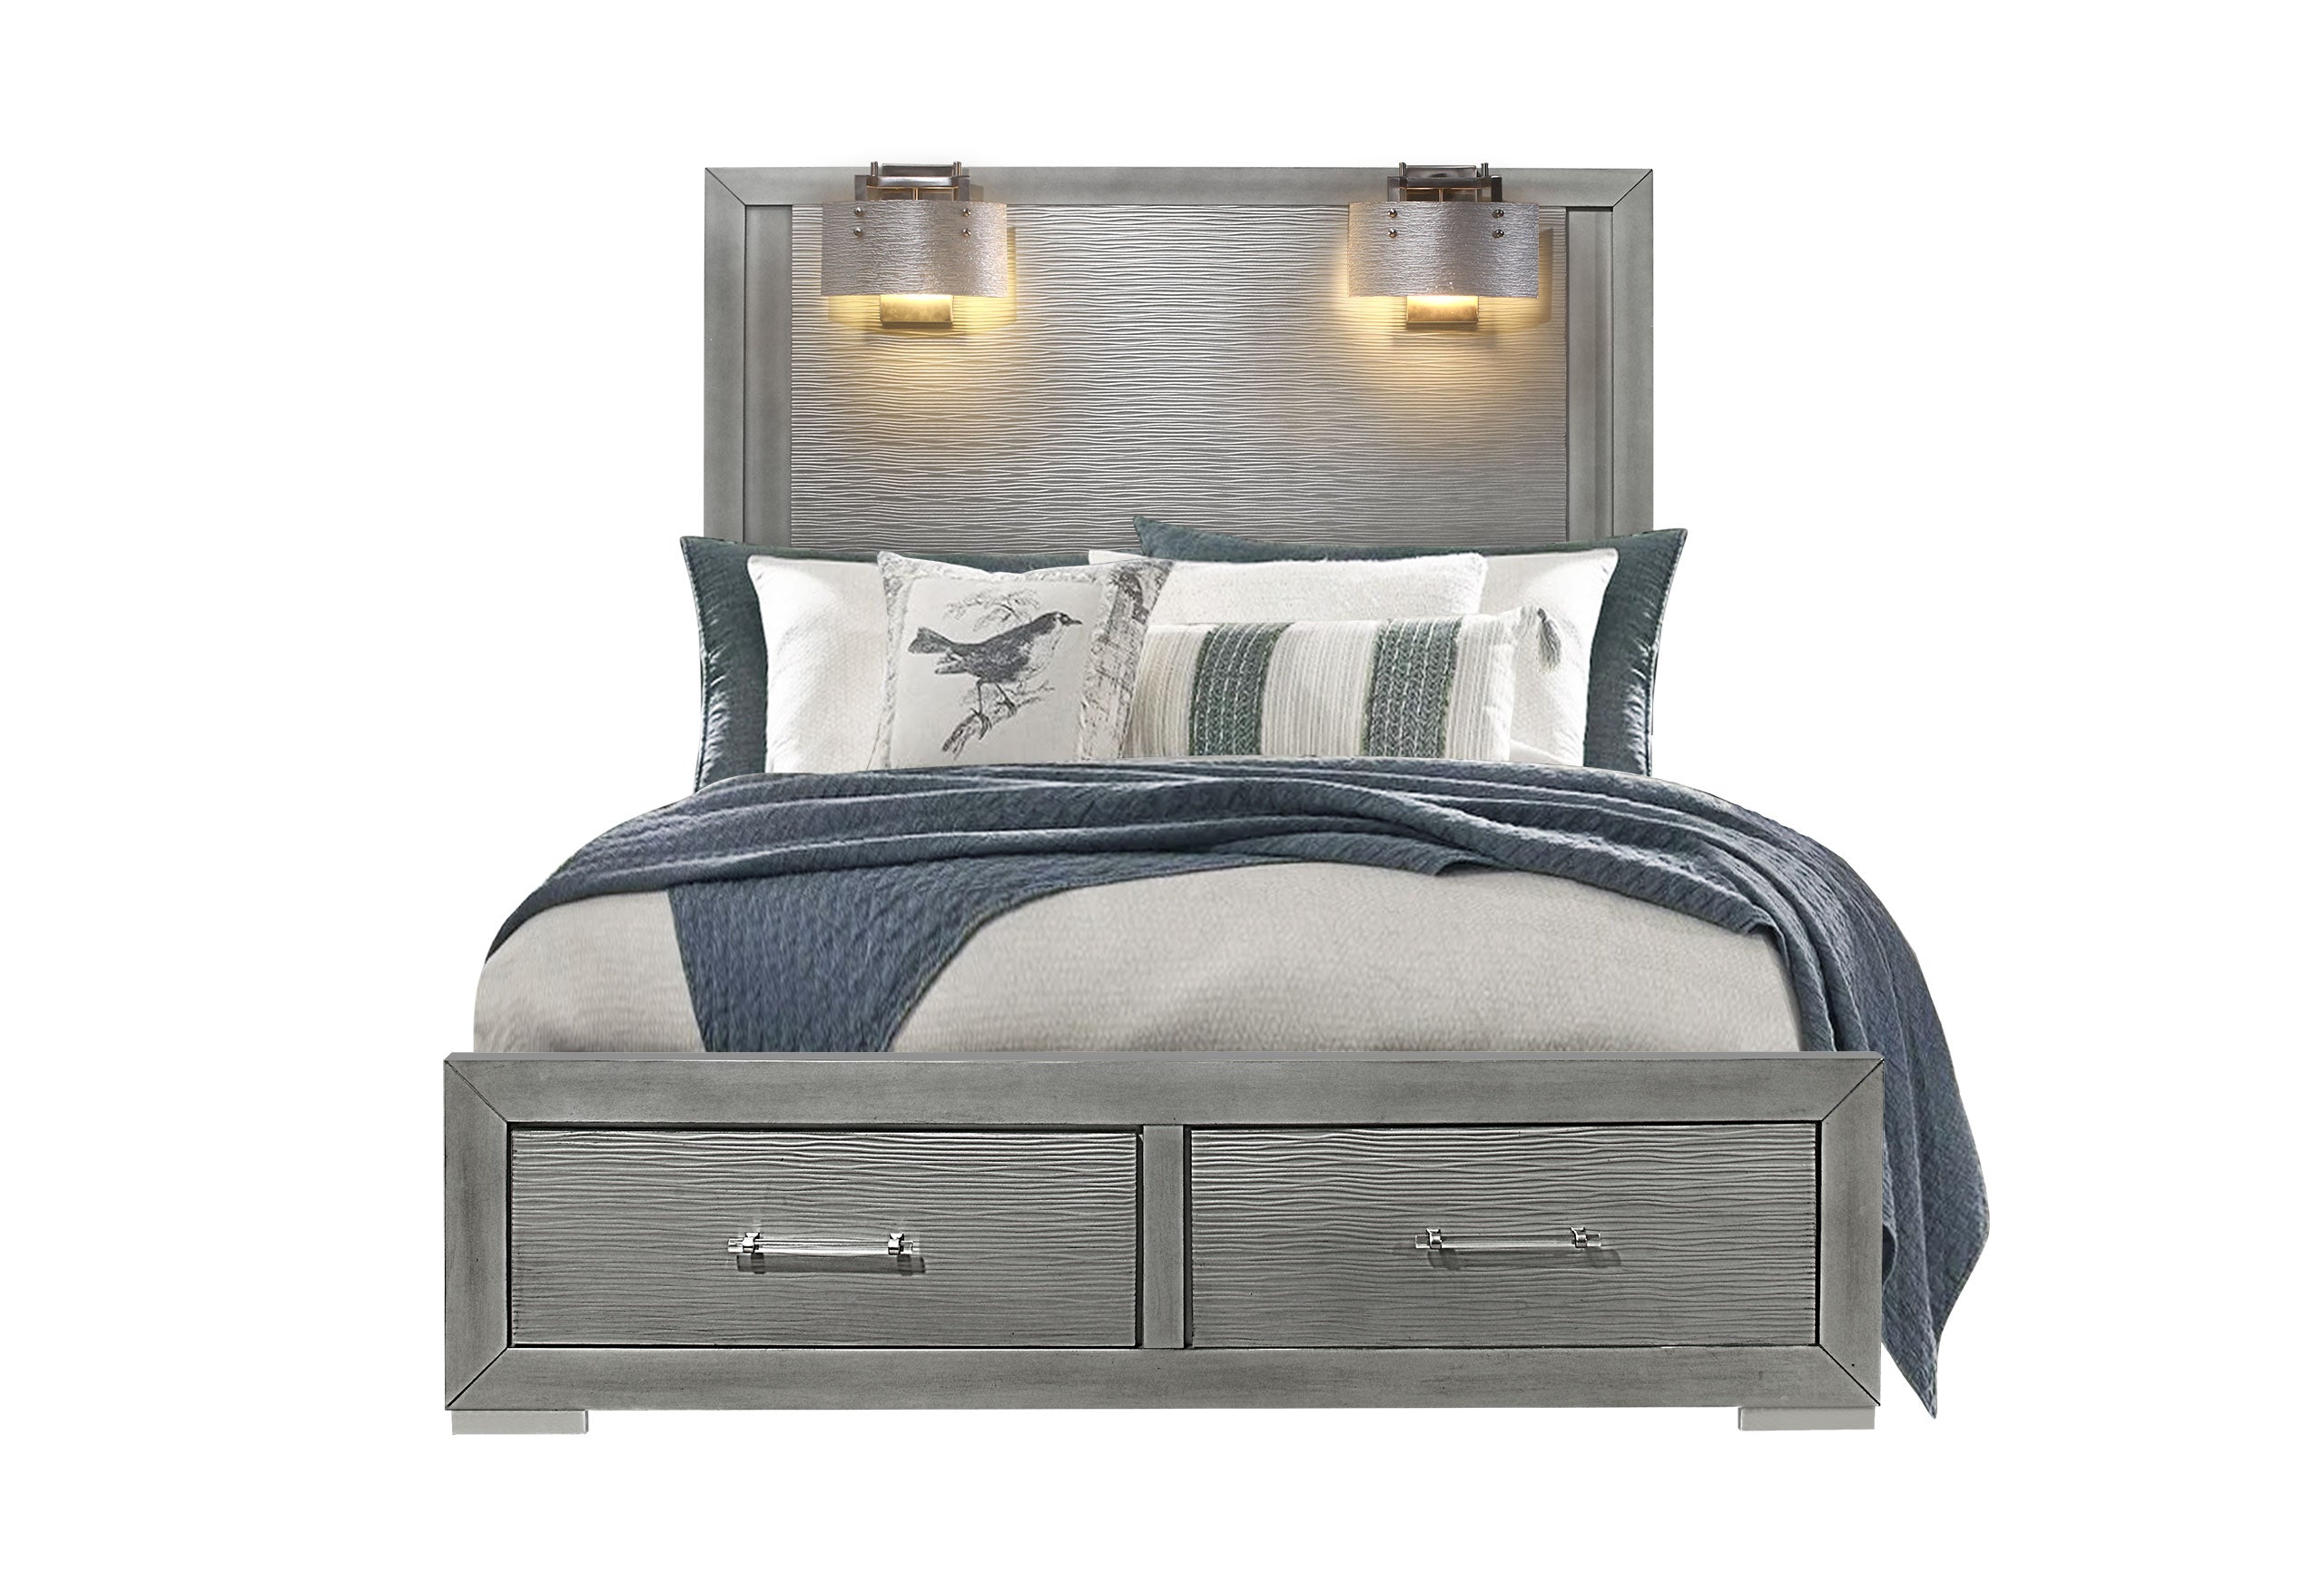 TIFFANY - FULL BED WITH 2 LAMPS, KING BED WITH 2 LAMPS, QUEEN BED WITH 2 LAMPS